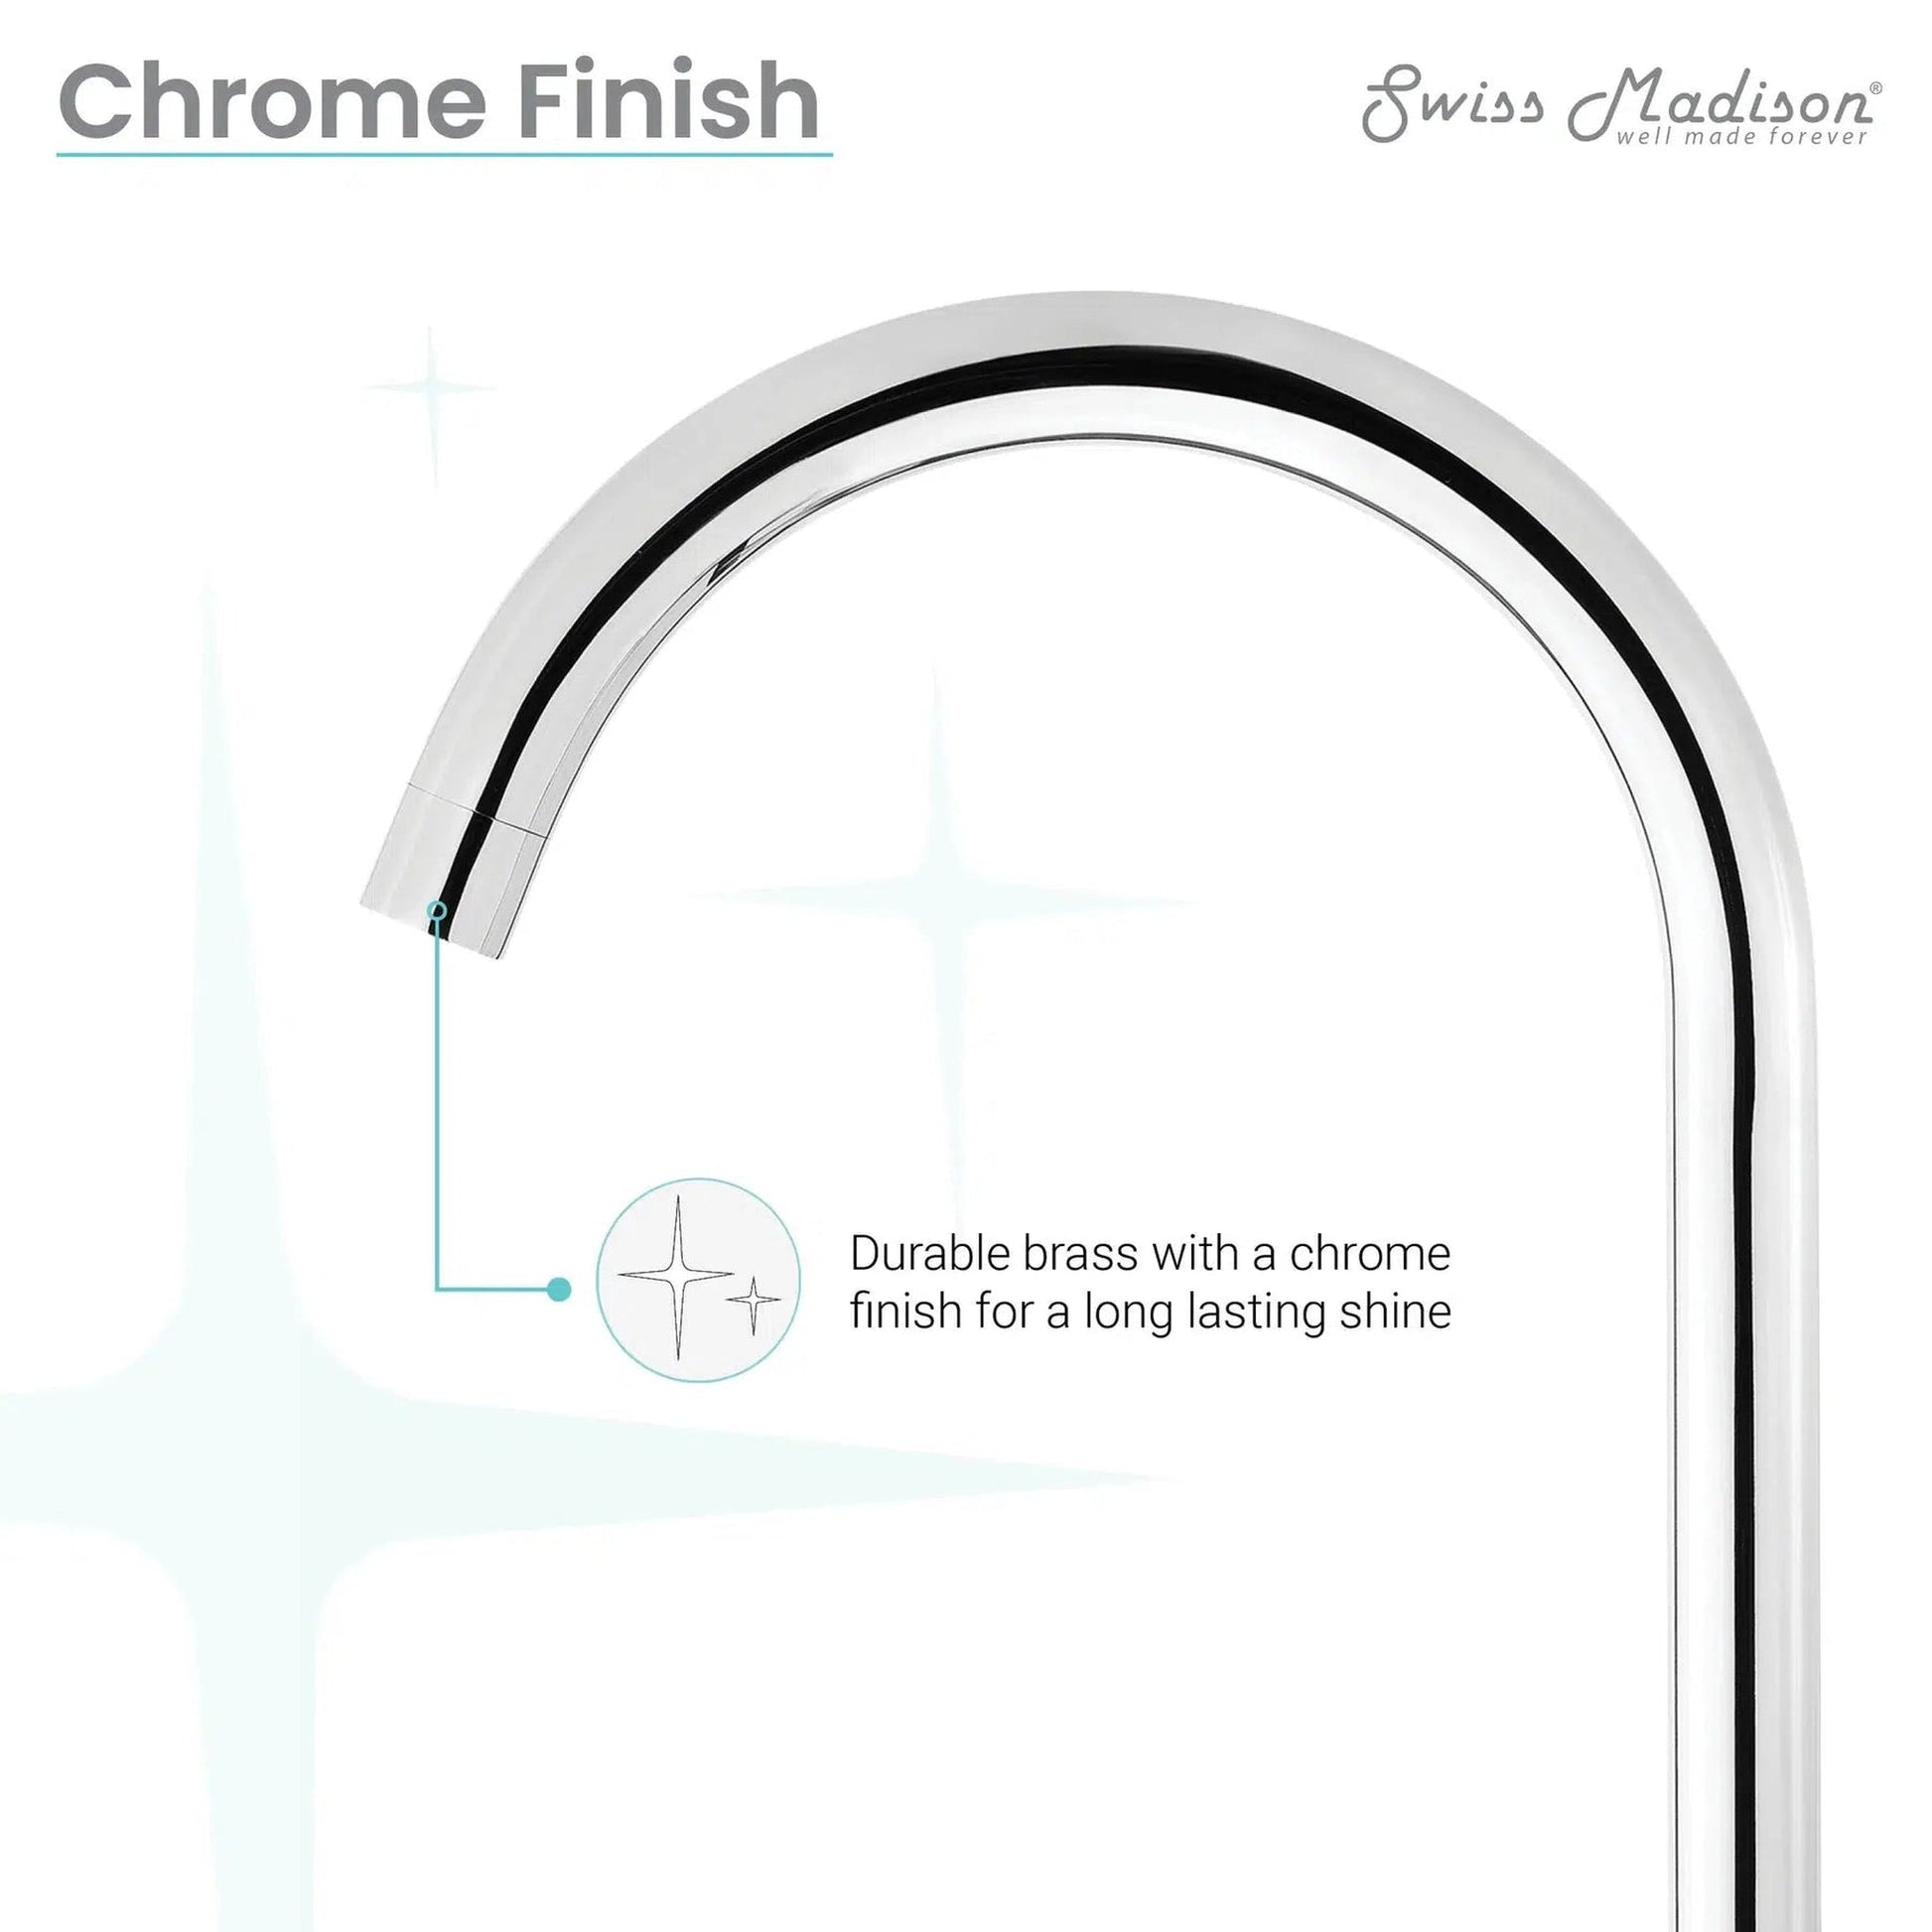 Swiss Madison Daxton 8" Chrome Widespread Bathroom Faucet With Bar Handles and 1.2 GPM Flow Rate